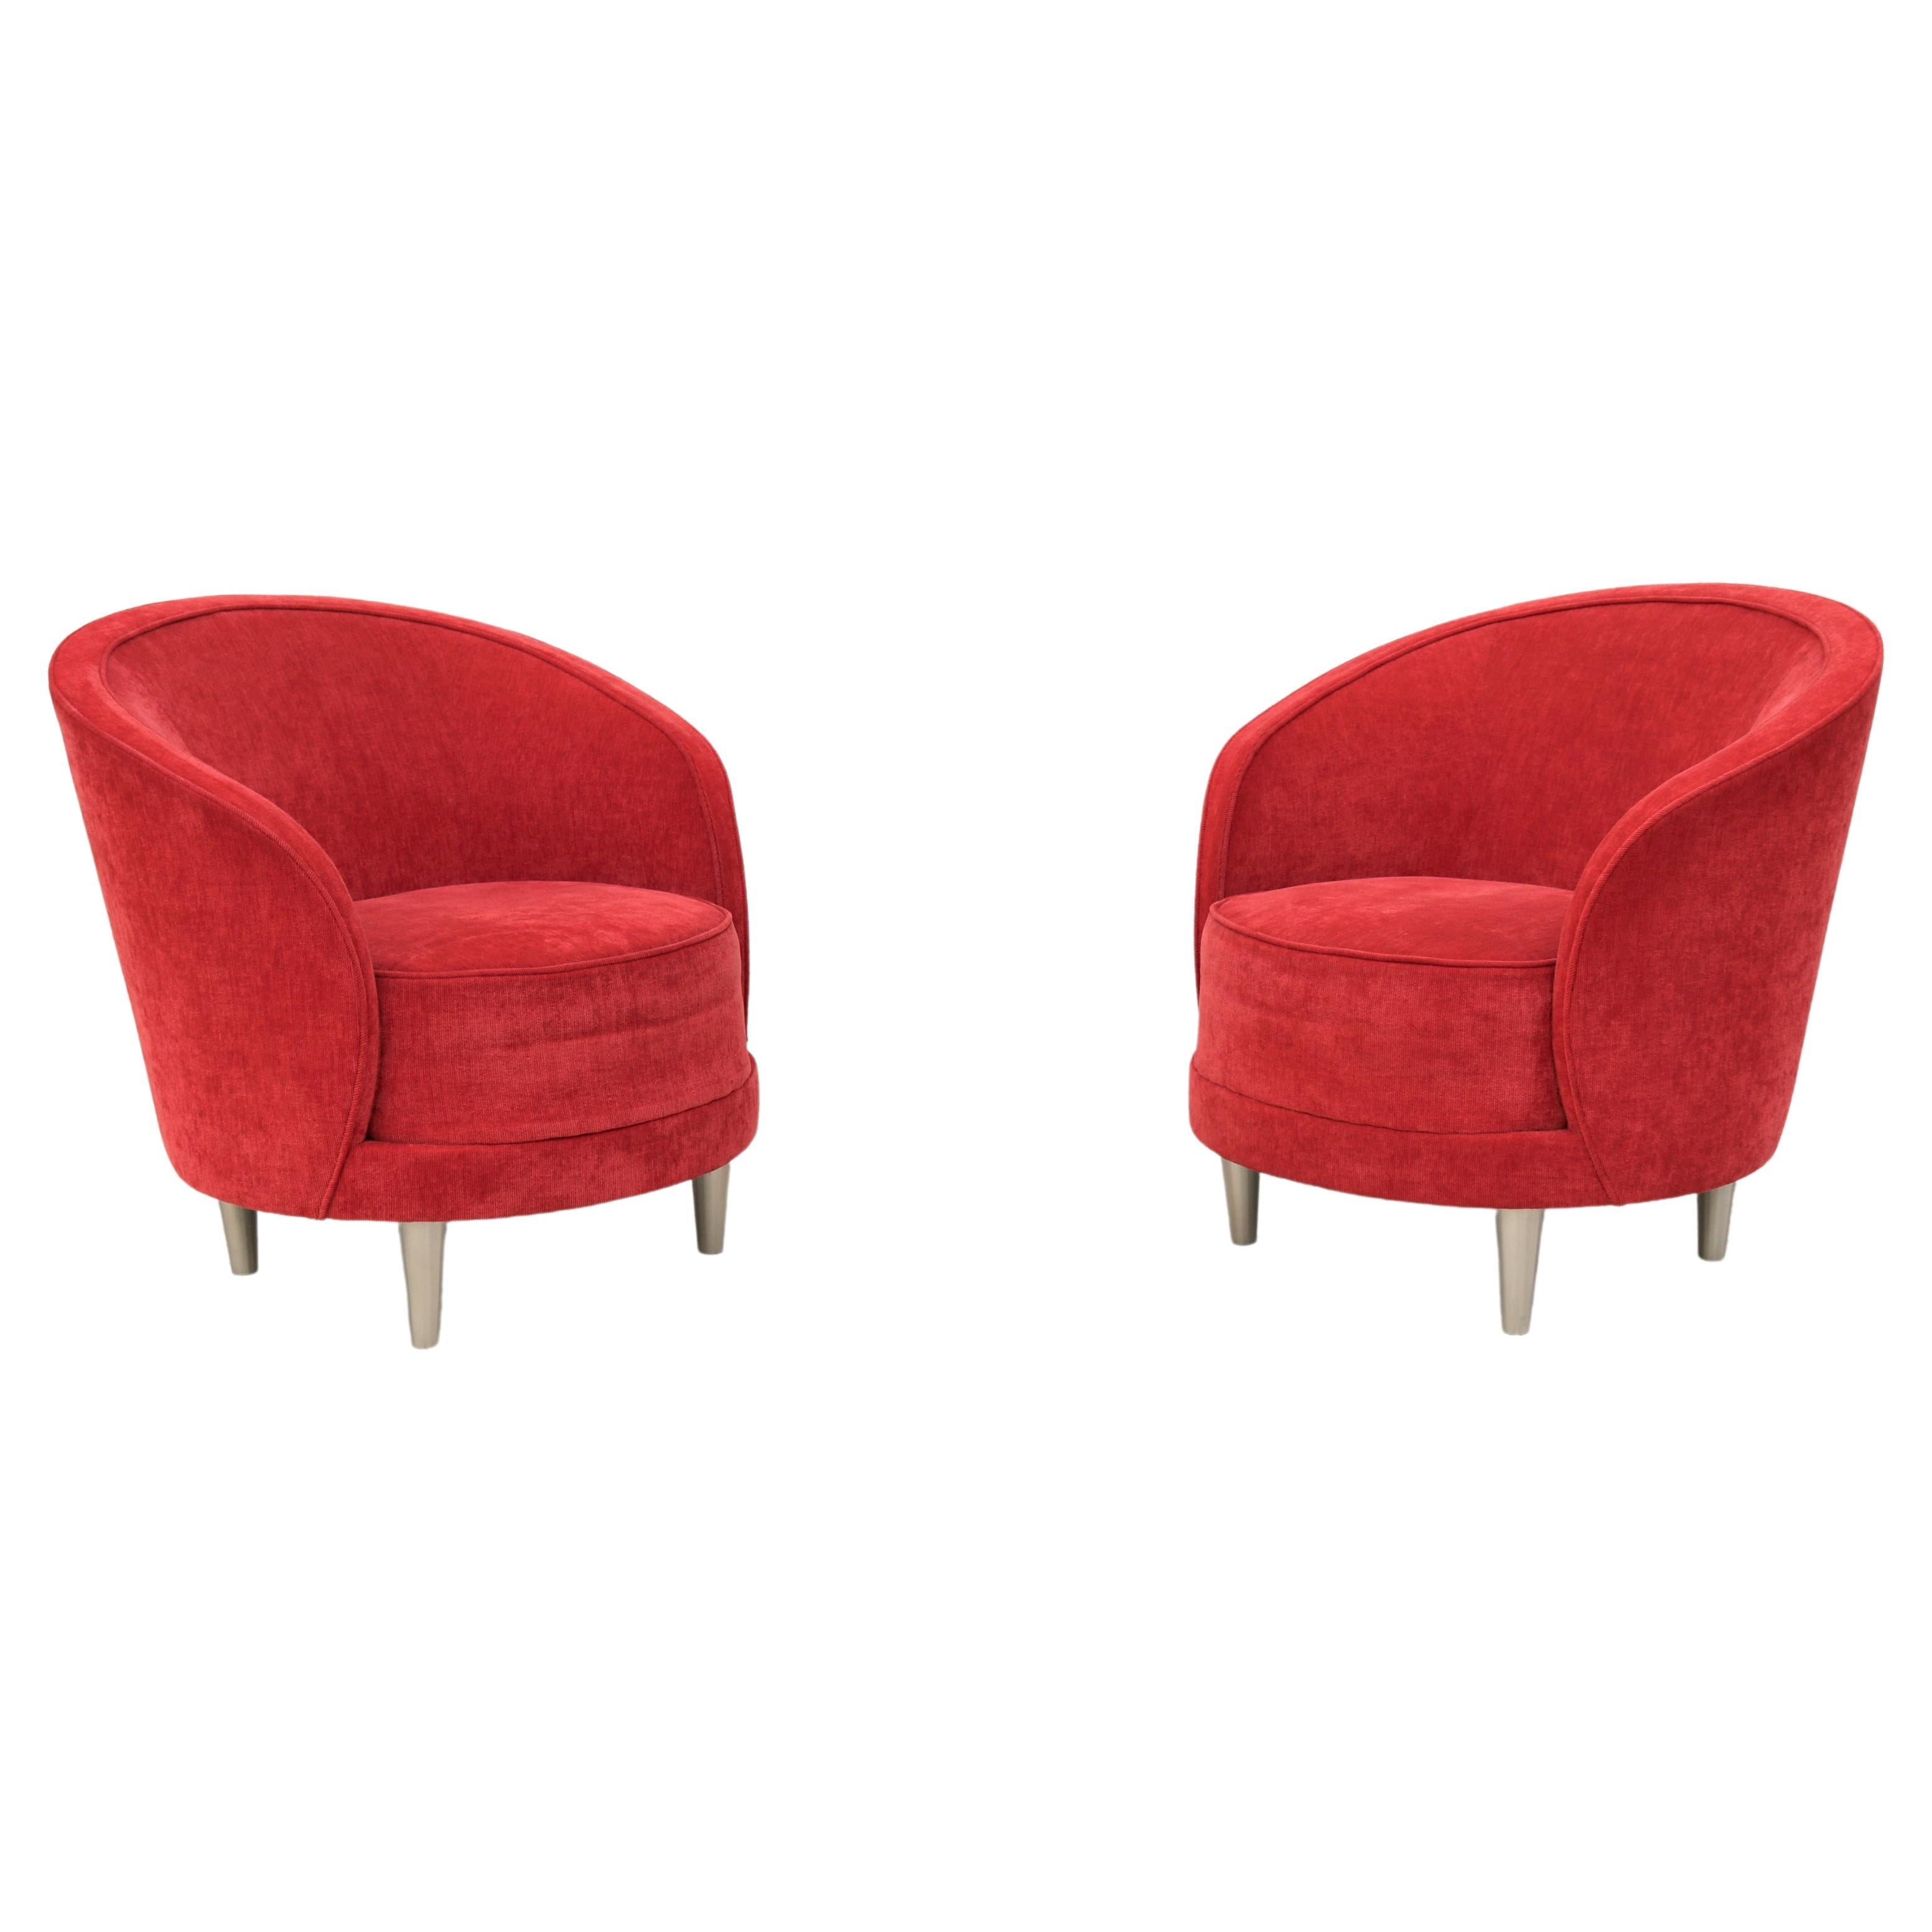 Contemporary Modern Martin Brattrud Kinsale Red Barrel Lounge Chairs, a Pair For Sale